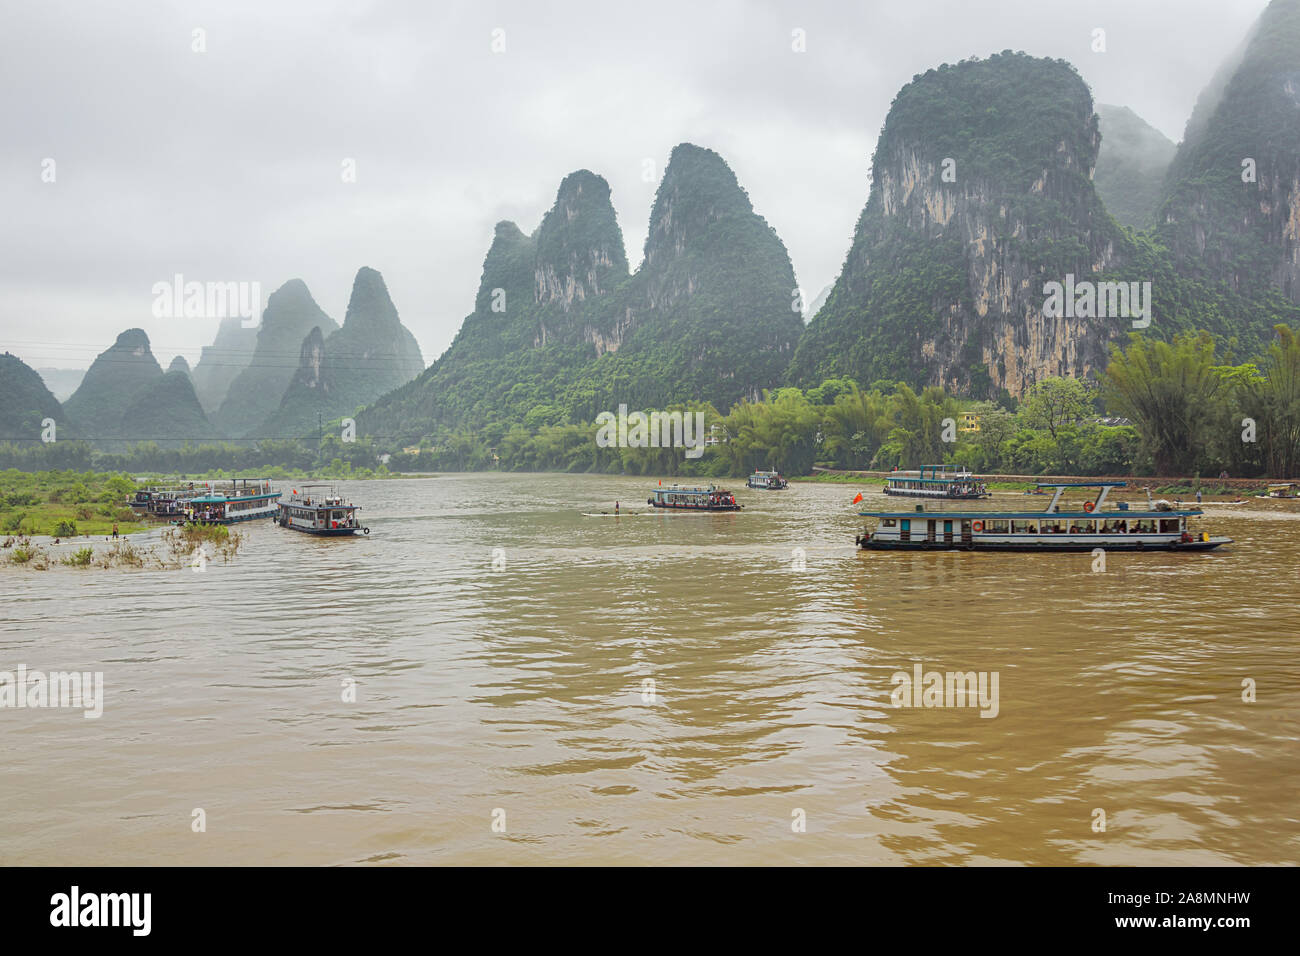 Editorial: GUILIN, GUANGXI, CHINA, April 19, 2019 - Busy boat traffic at Maozhou island in the vicinity of Lingchuan near Guilin Stock Photo